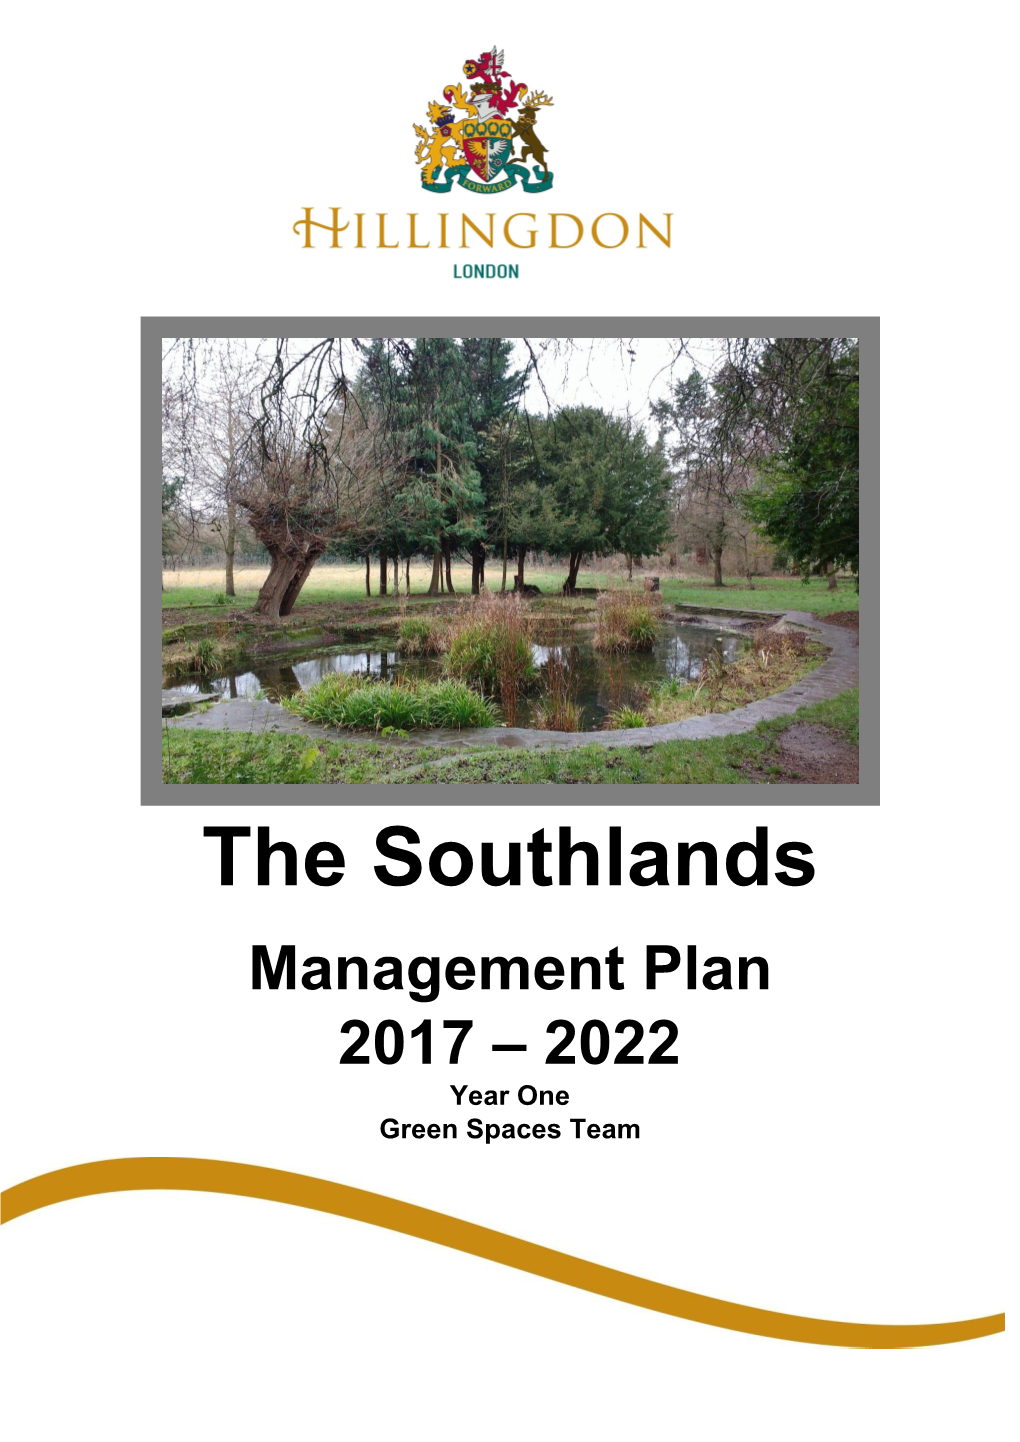 The Southlands